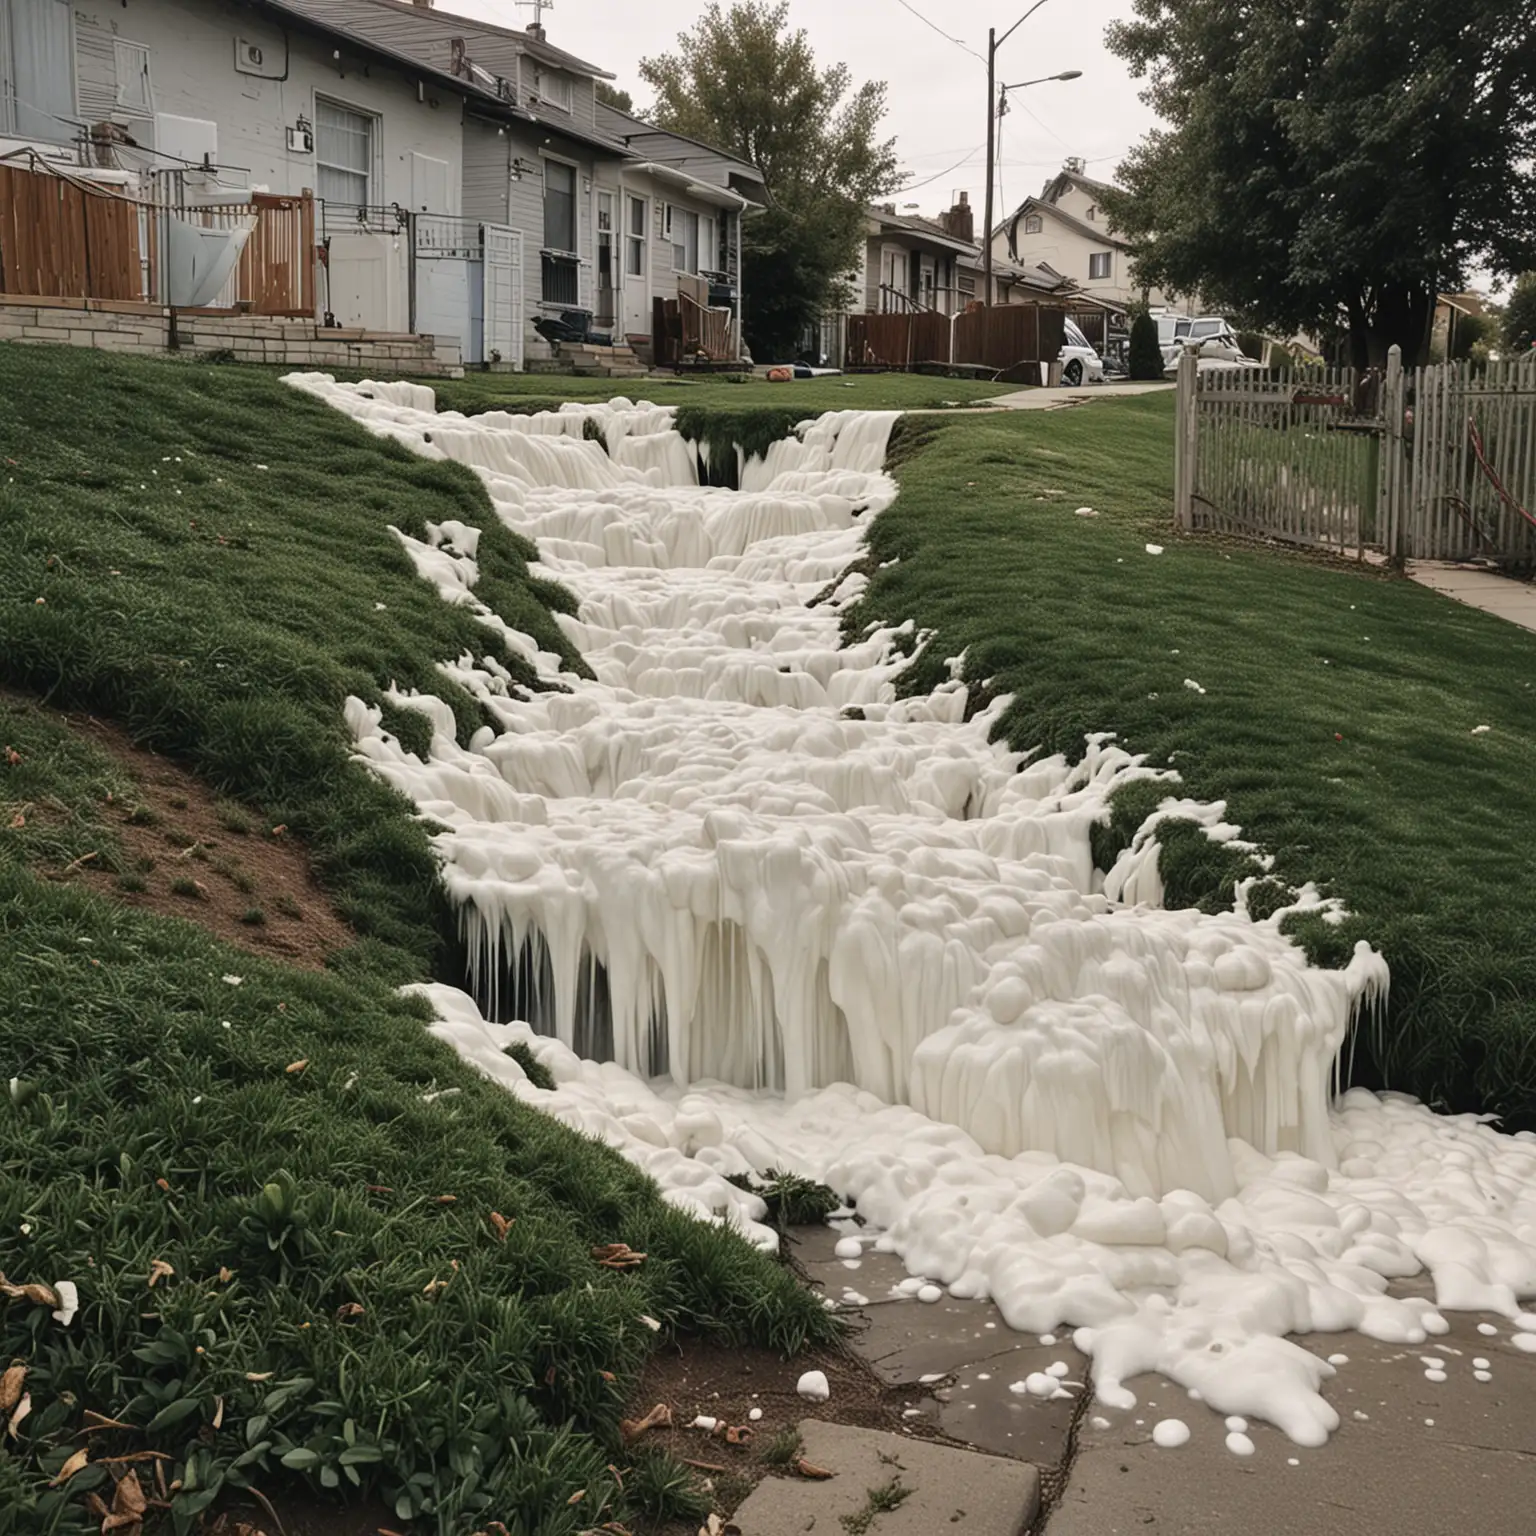 waterfall of milk in the middle of a neighborhood